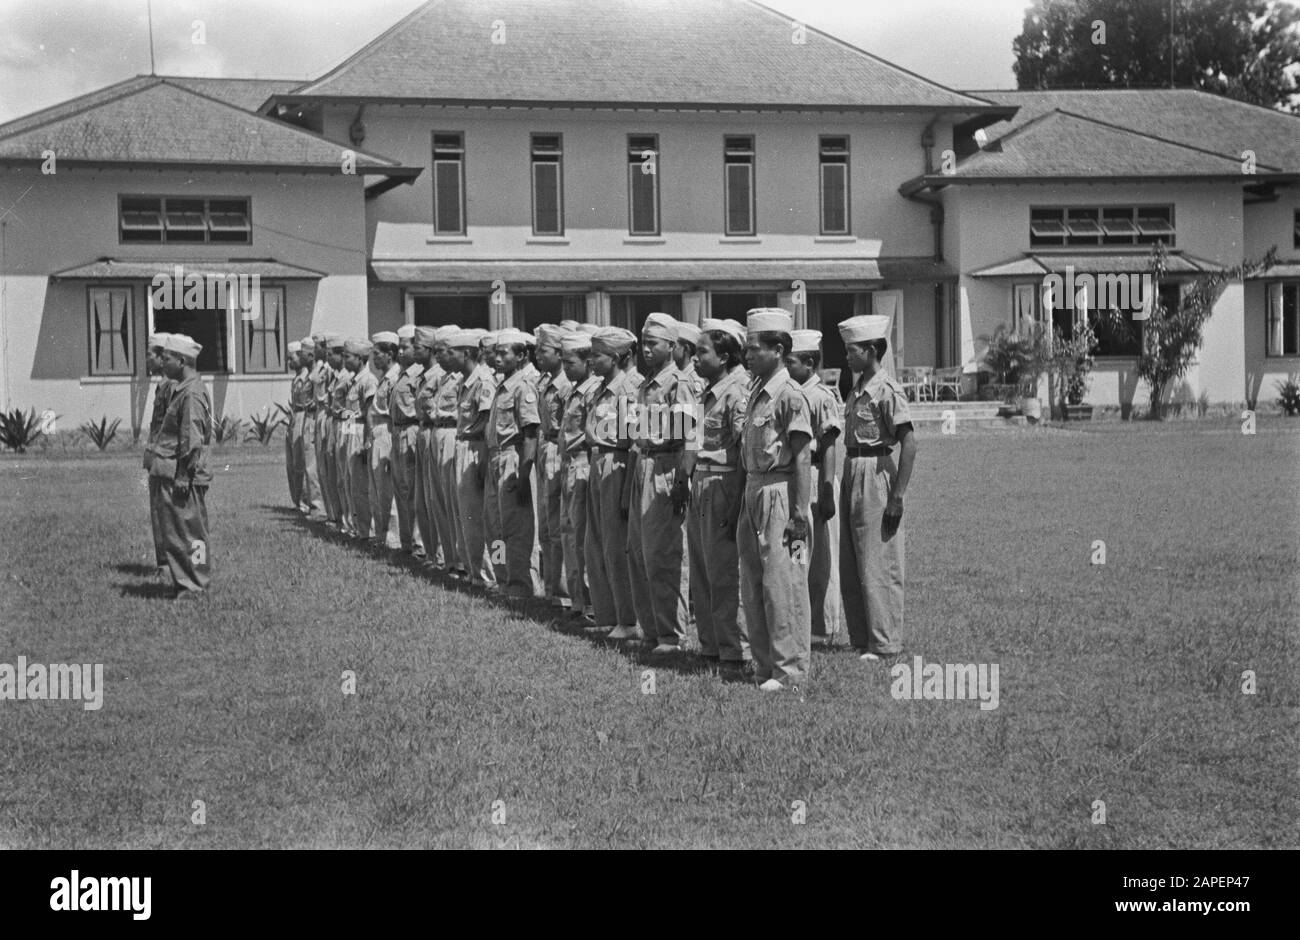 Makassar. Visit by Prime Minister Beel; Troop movement; Hadjizwaard; Major General Sas Description: Visit by Prime Minister Beel. In the garden of the residence office? Is there a guard of honor KNIL recruits? took office. Date: December 1948 Location: Indonesia, Dutch East Indies Stock Photo